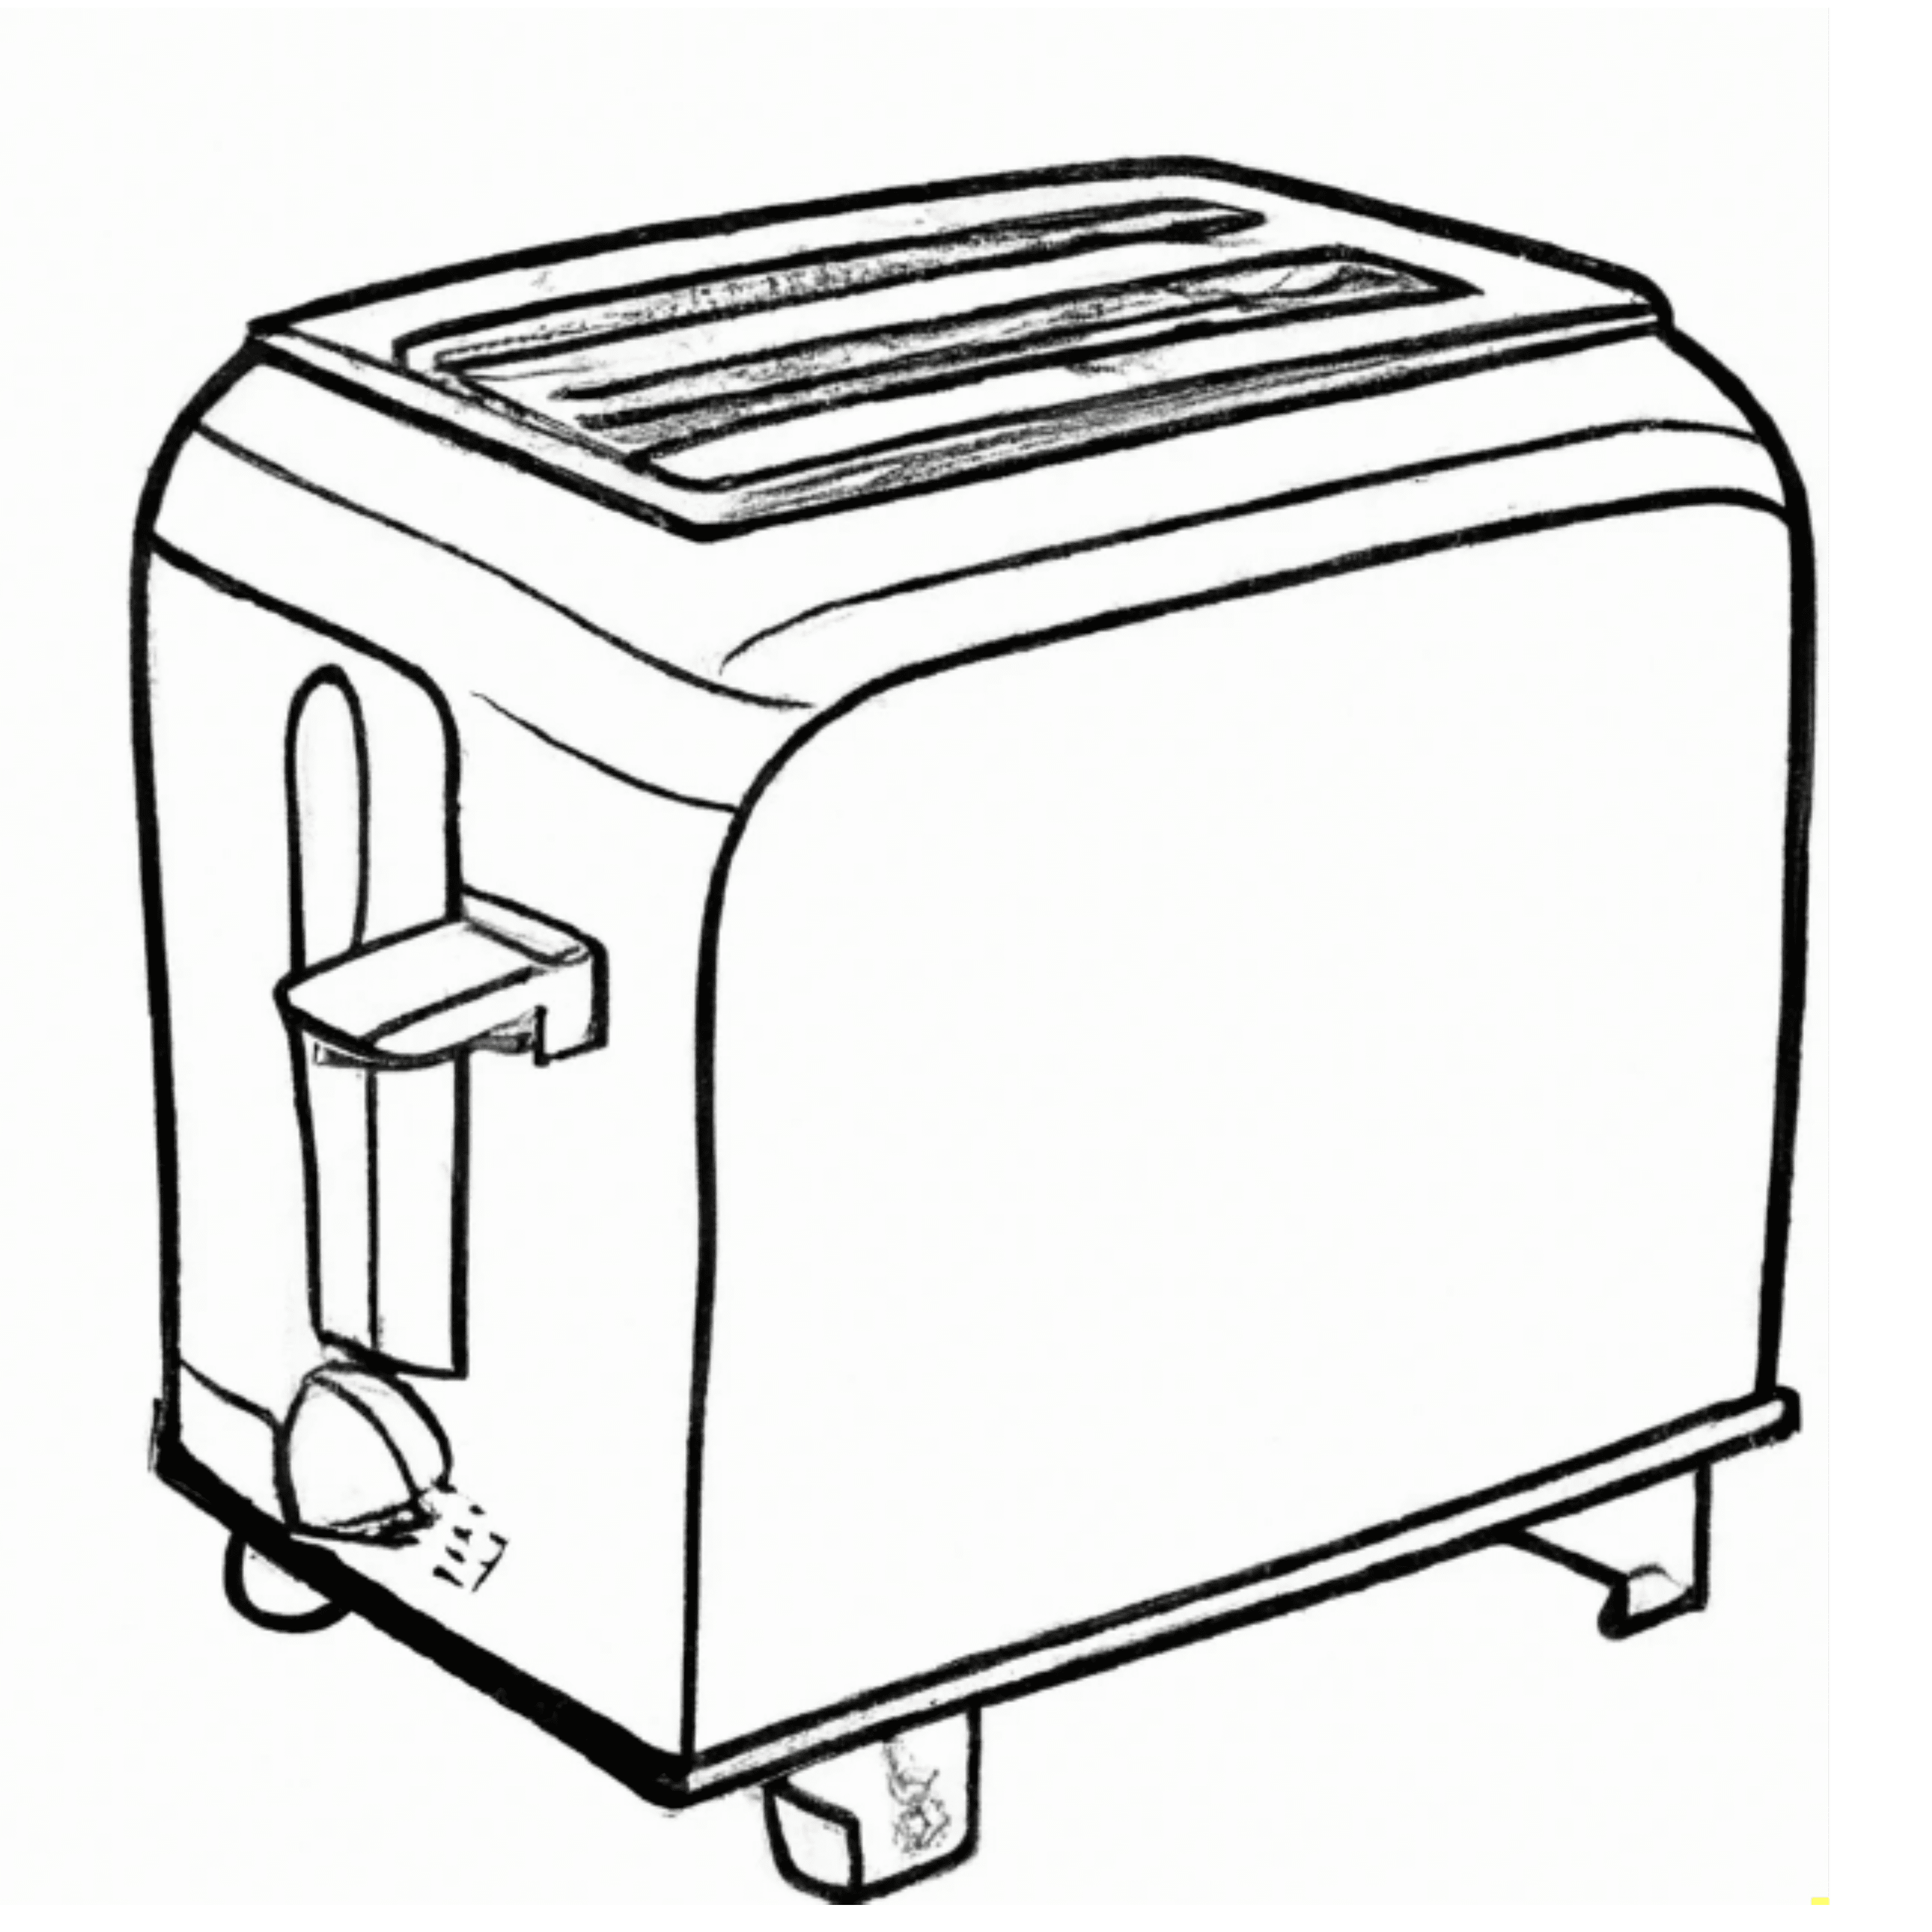 Line drawing of a toaster